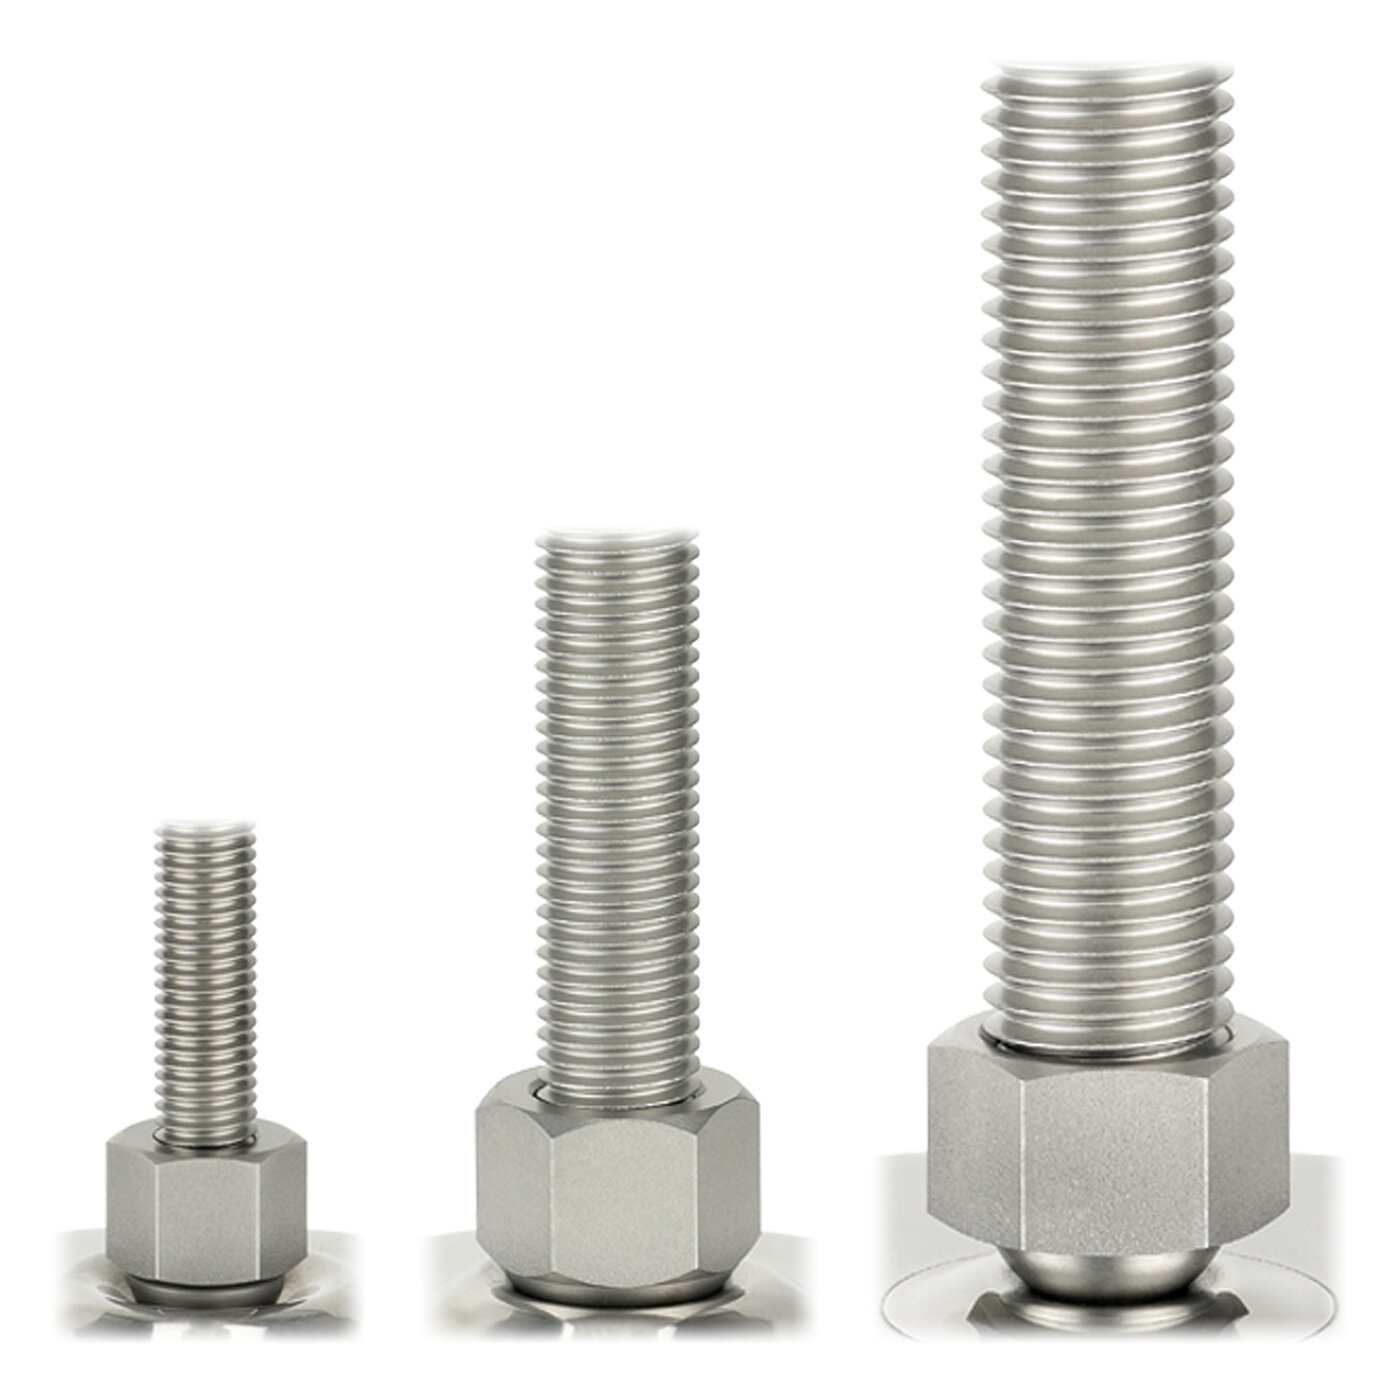 detailed view of three hexagonal cap nuts made of matte-shiny stainless steel, with different thread thicknesses and different thread lengths, as part of bwz Schwingungstechnik® levelling elements, isolated on white background